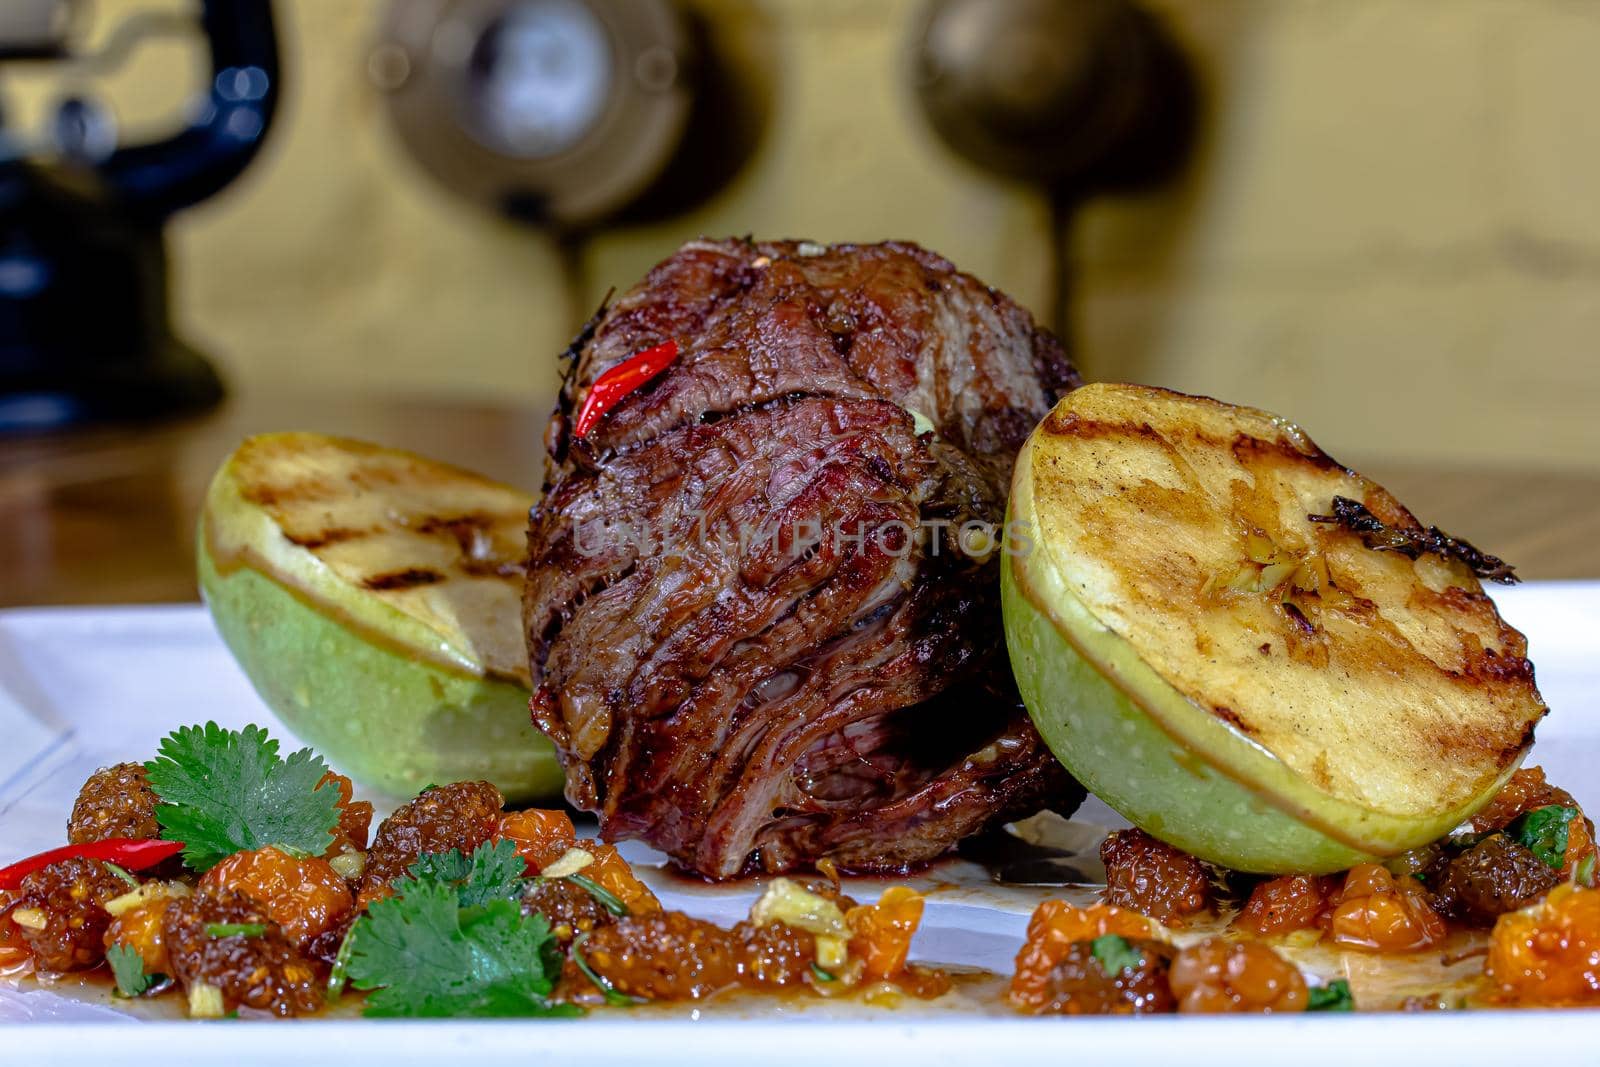 meat savory : beef fillet mignon grilled and garnished with baked apples and tomatoes by Milanchikov